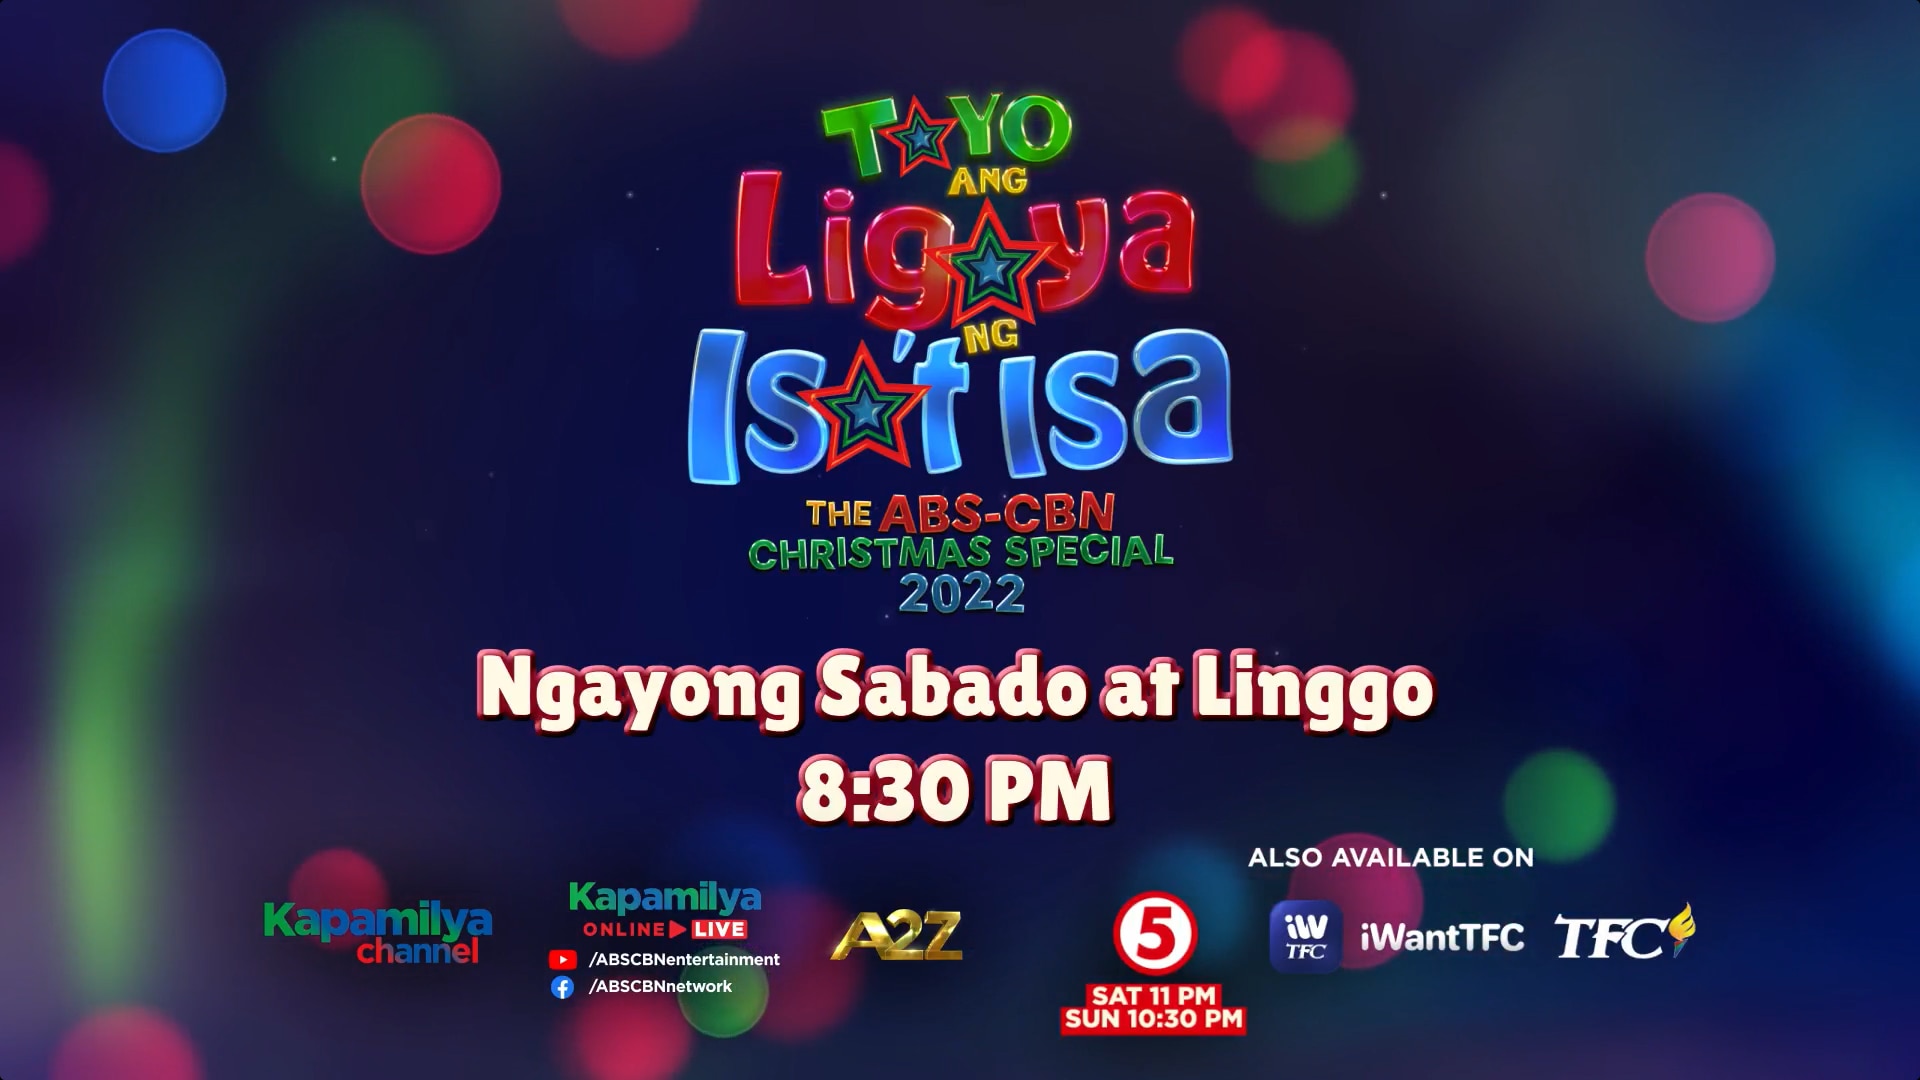 ABS CBN CHRISTMAS SPECIAL PLATFORMS